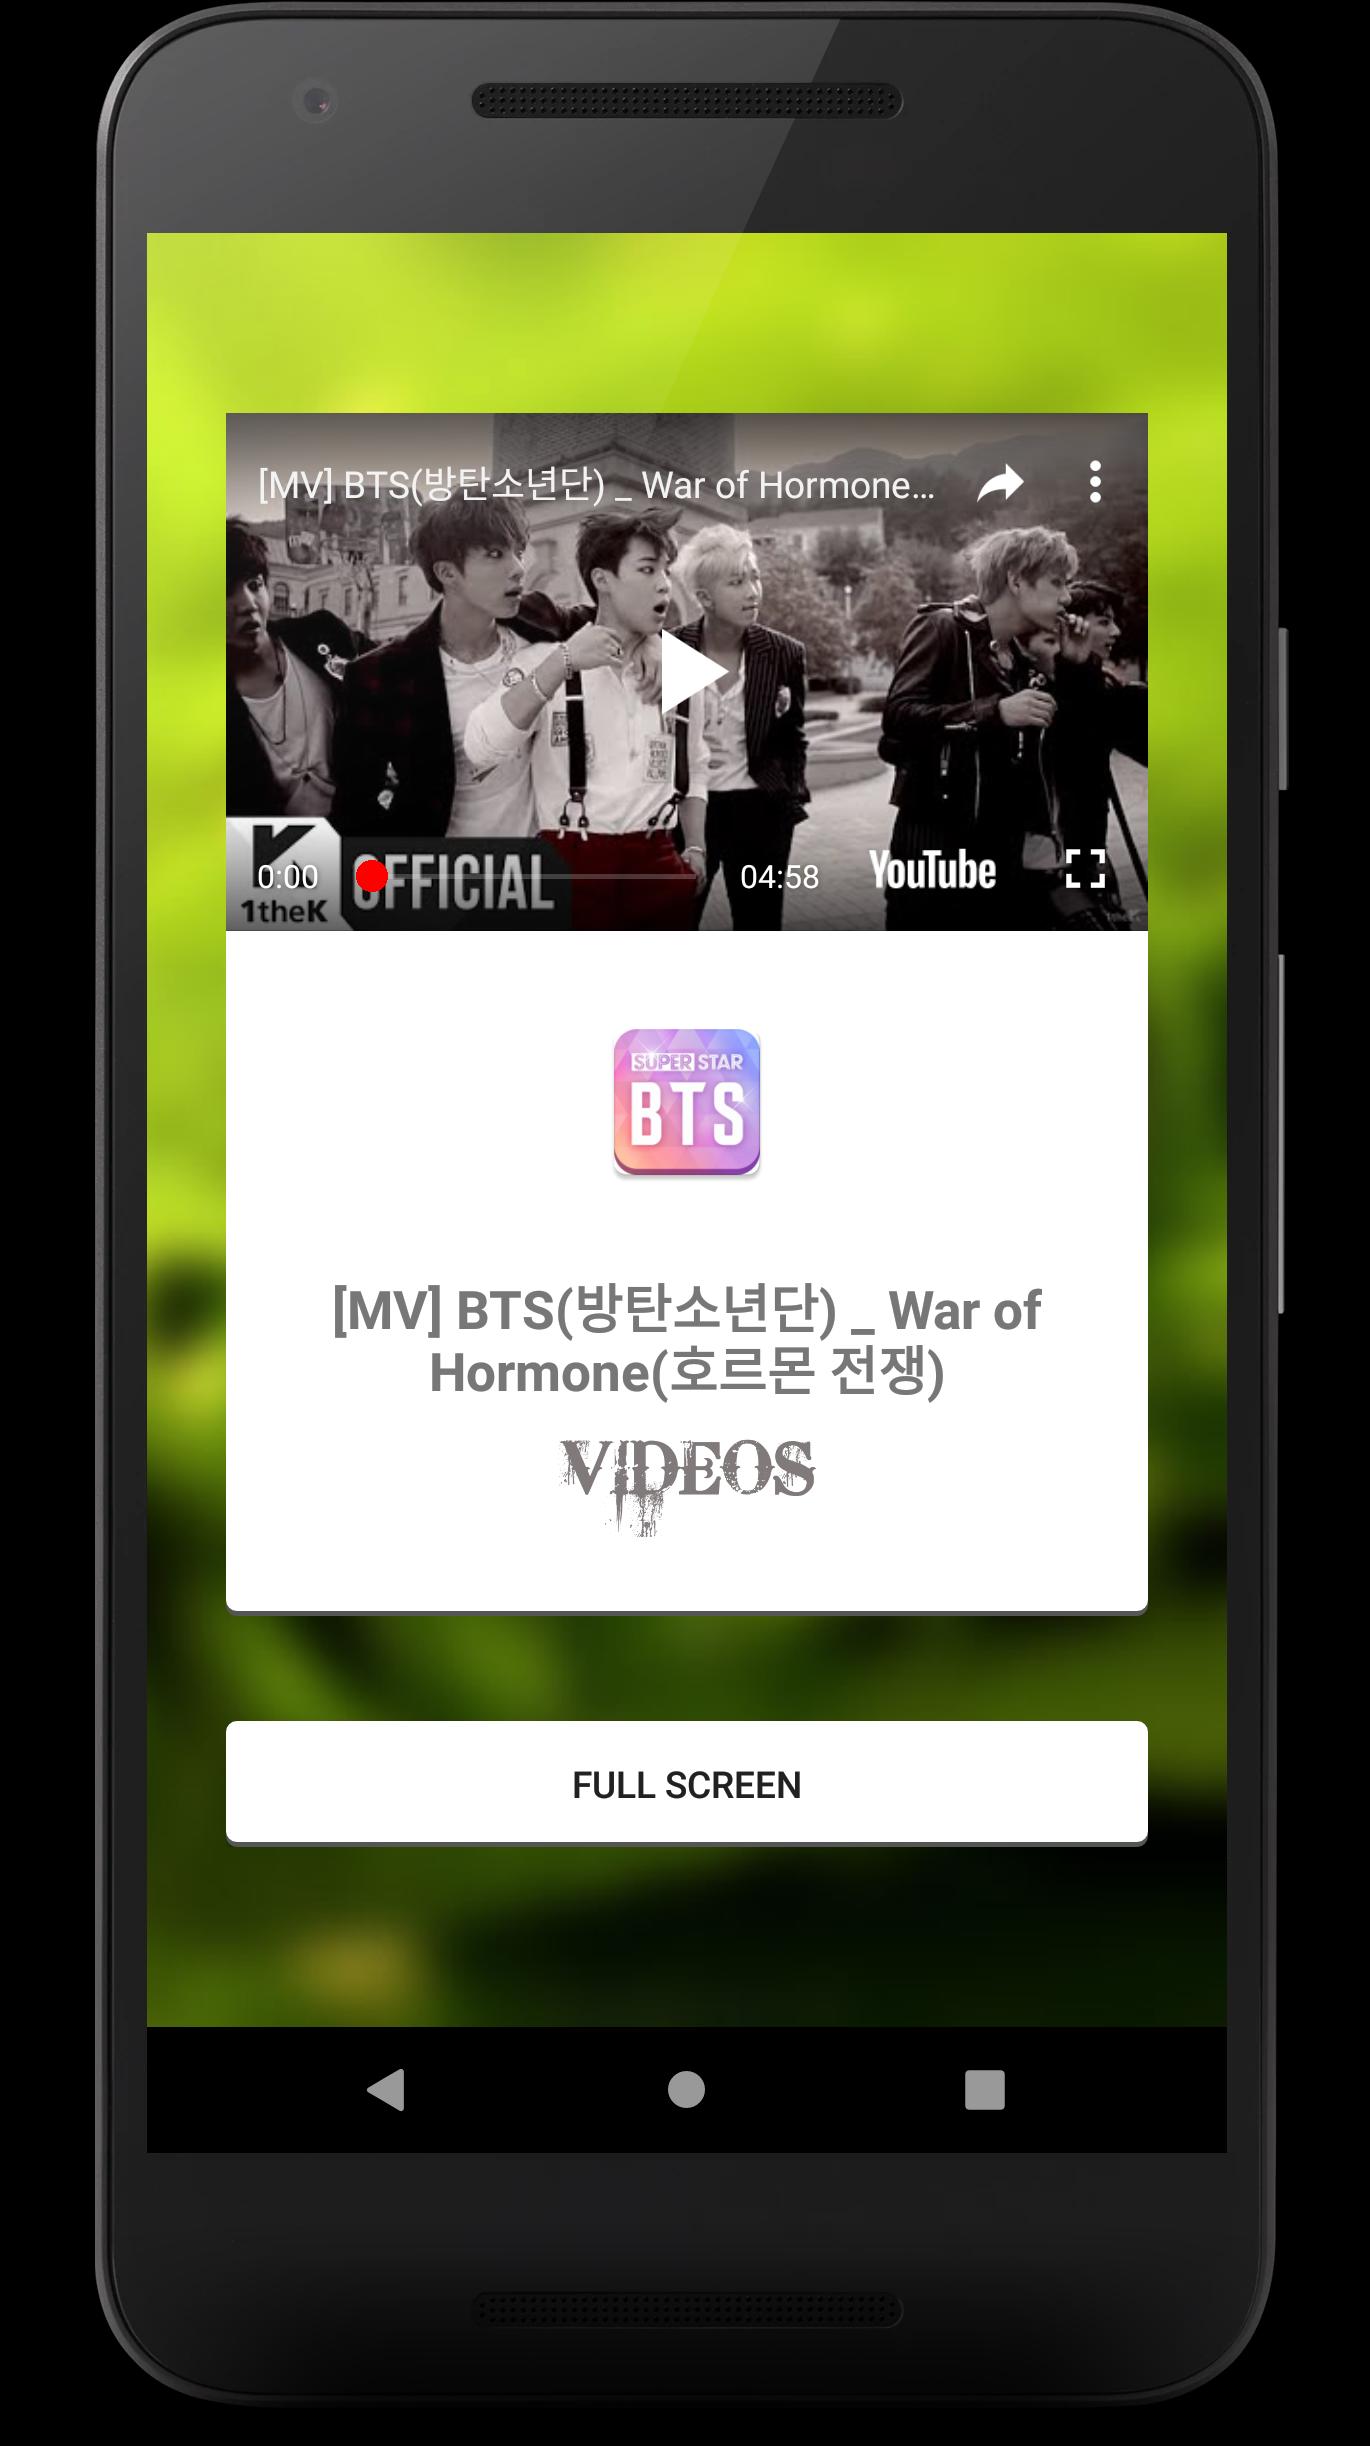 Bts All Music Video 2019 For Android Apk Download - music codes for roblox dna bts